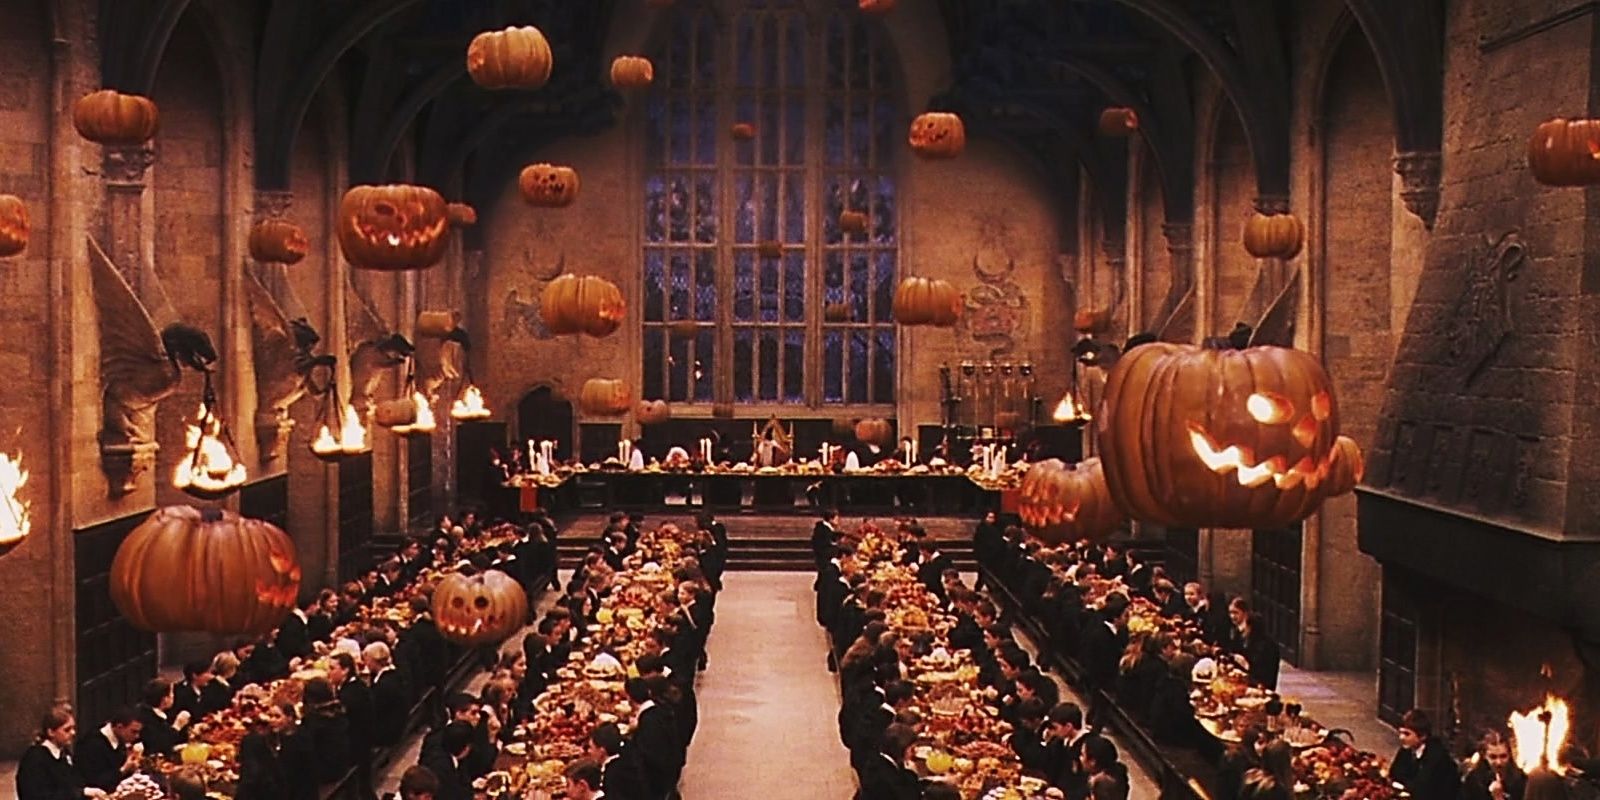 The Hogwarts Great Hall decorated for Halloween in Harry Potter